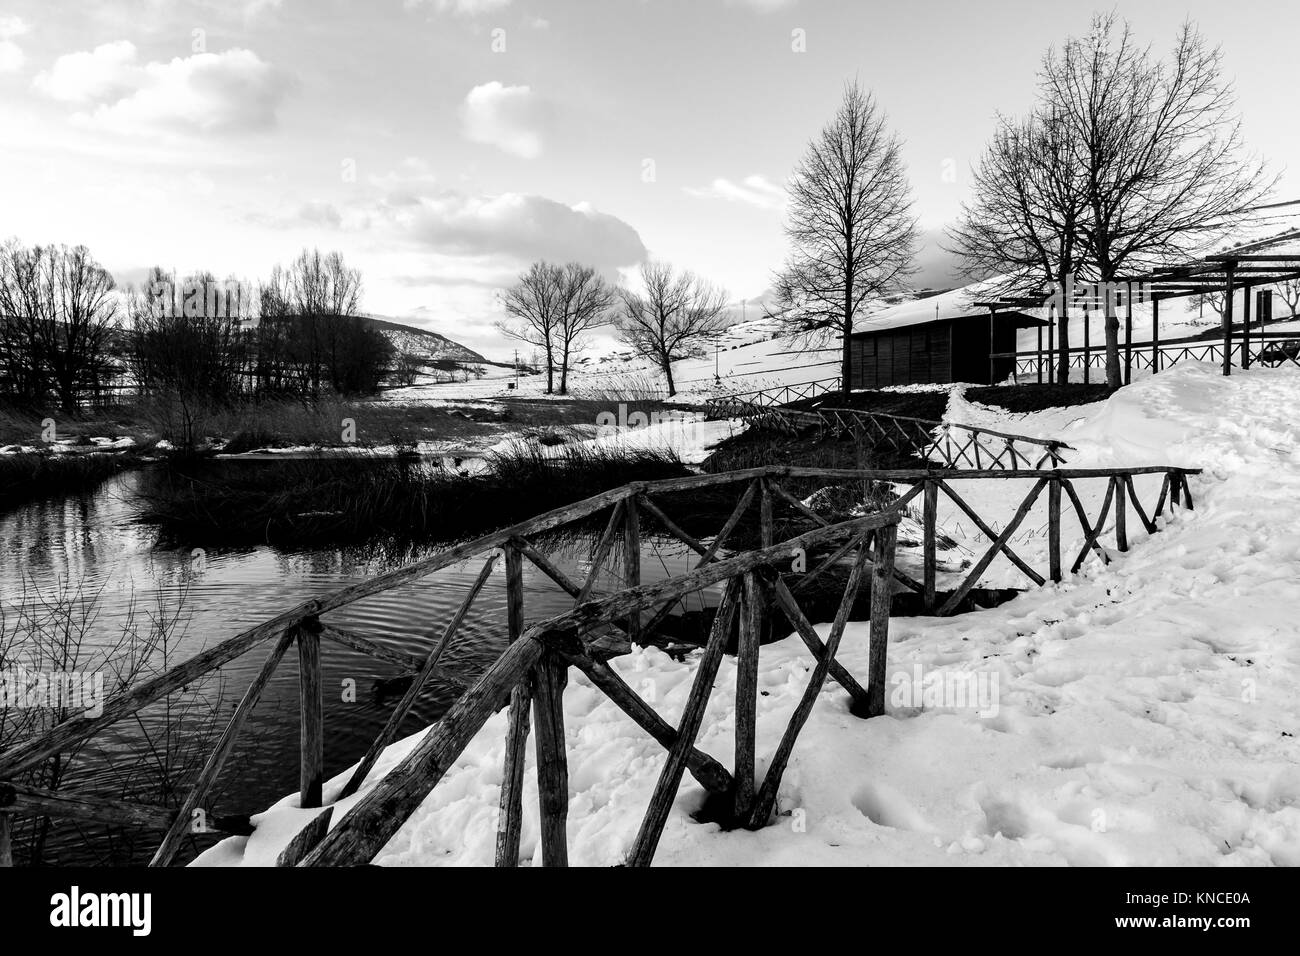 Colfiorito (Umbria) lake in winter, with snow all around, trees and a small wooden building Stock Photo